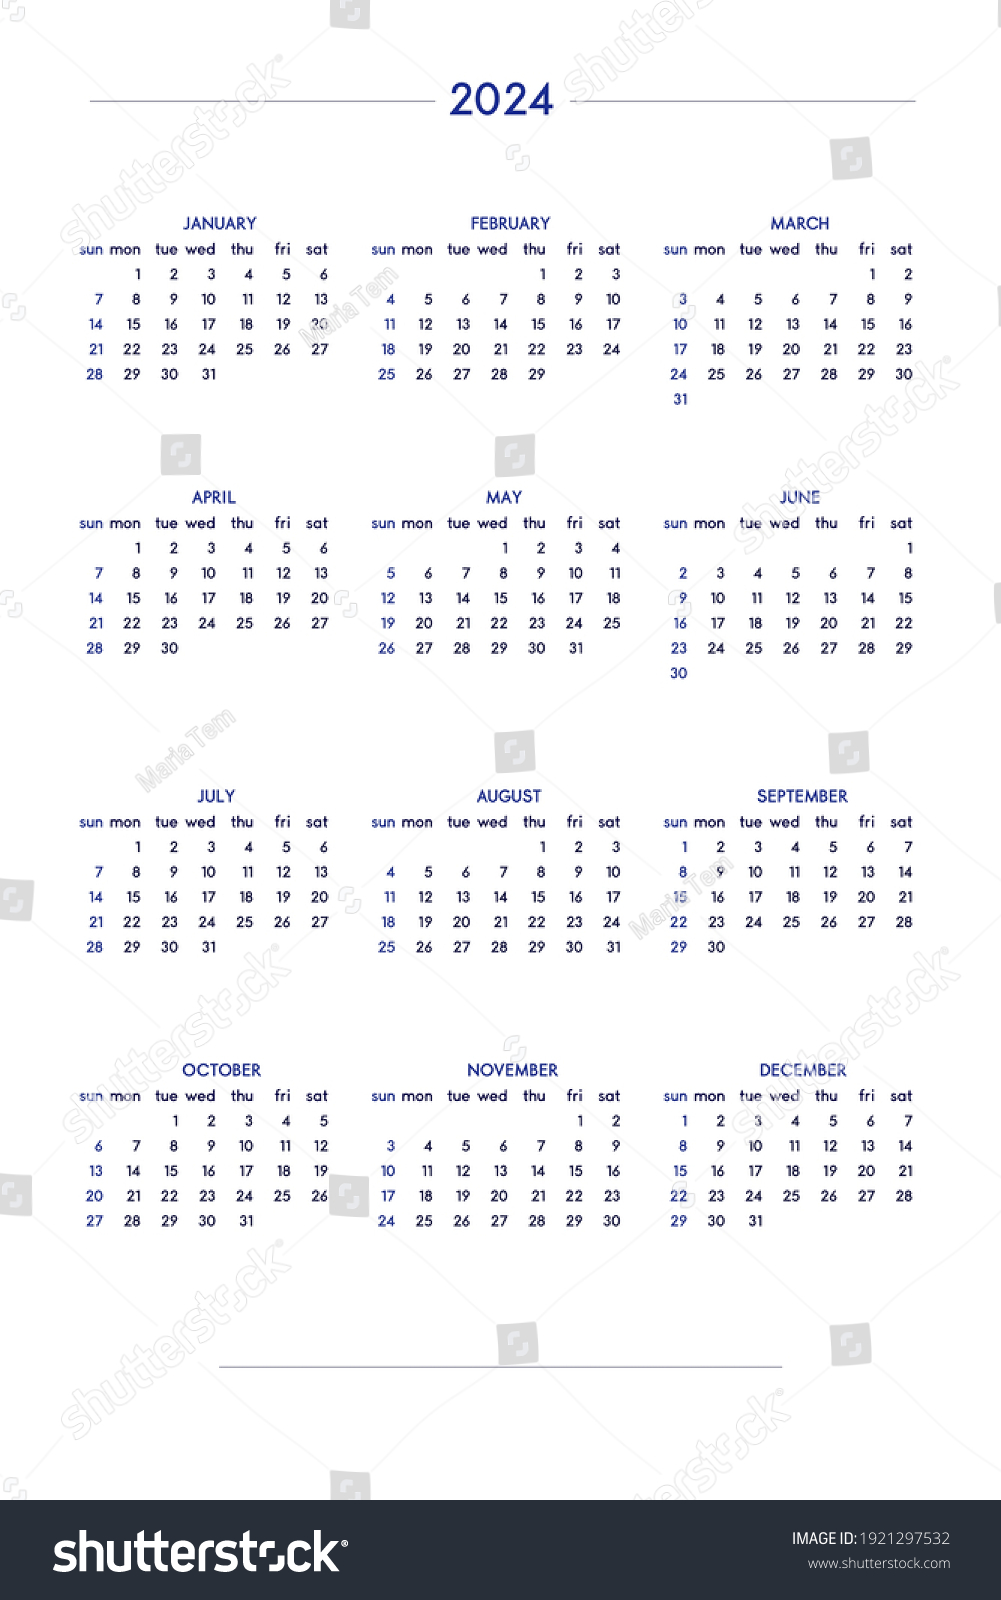 2024-calendar-set-classic-strict-style-stock-vector-royalty-free-1921297532-shutterstock